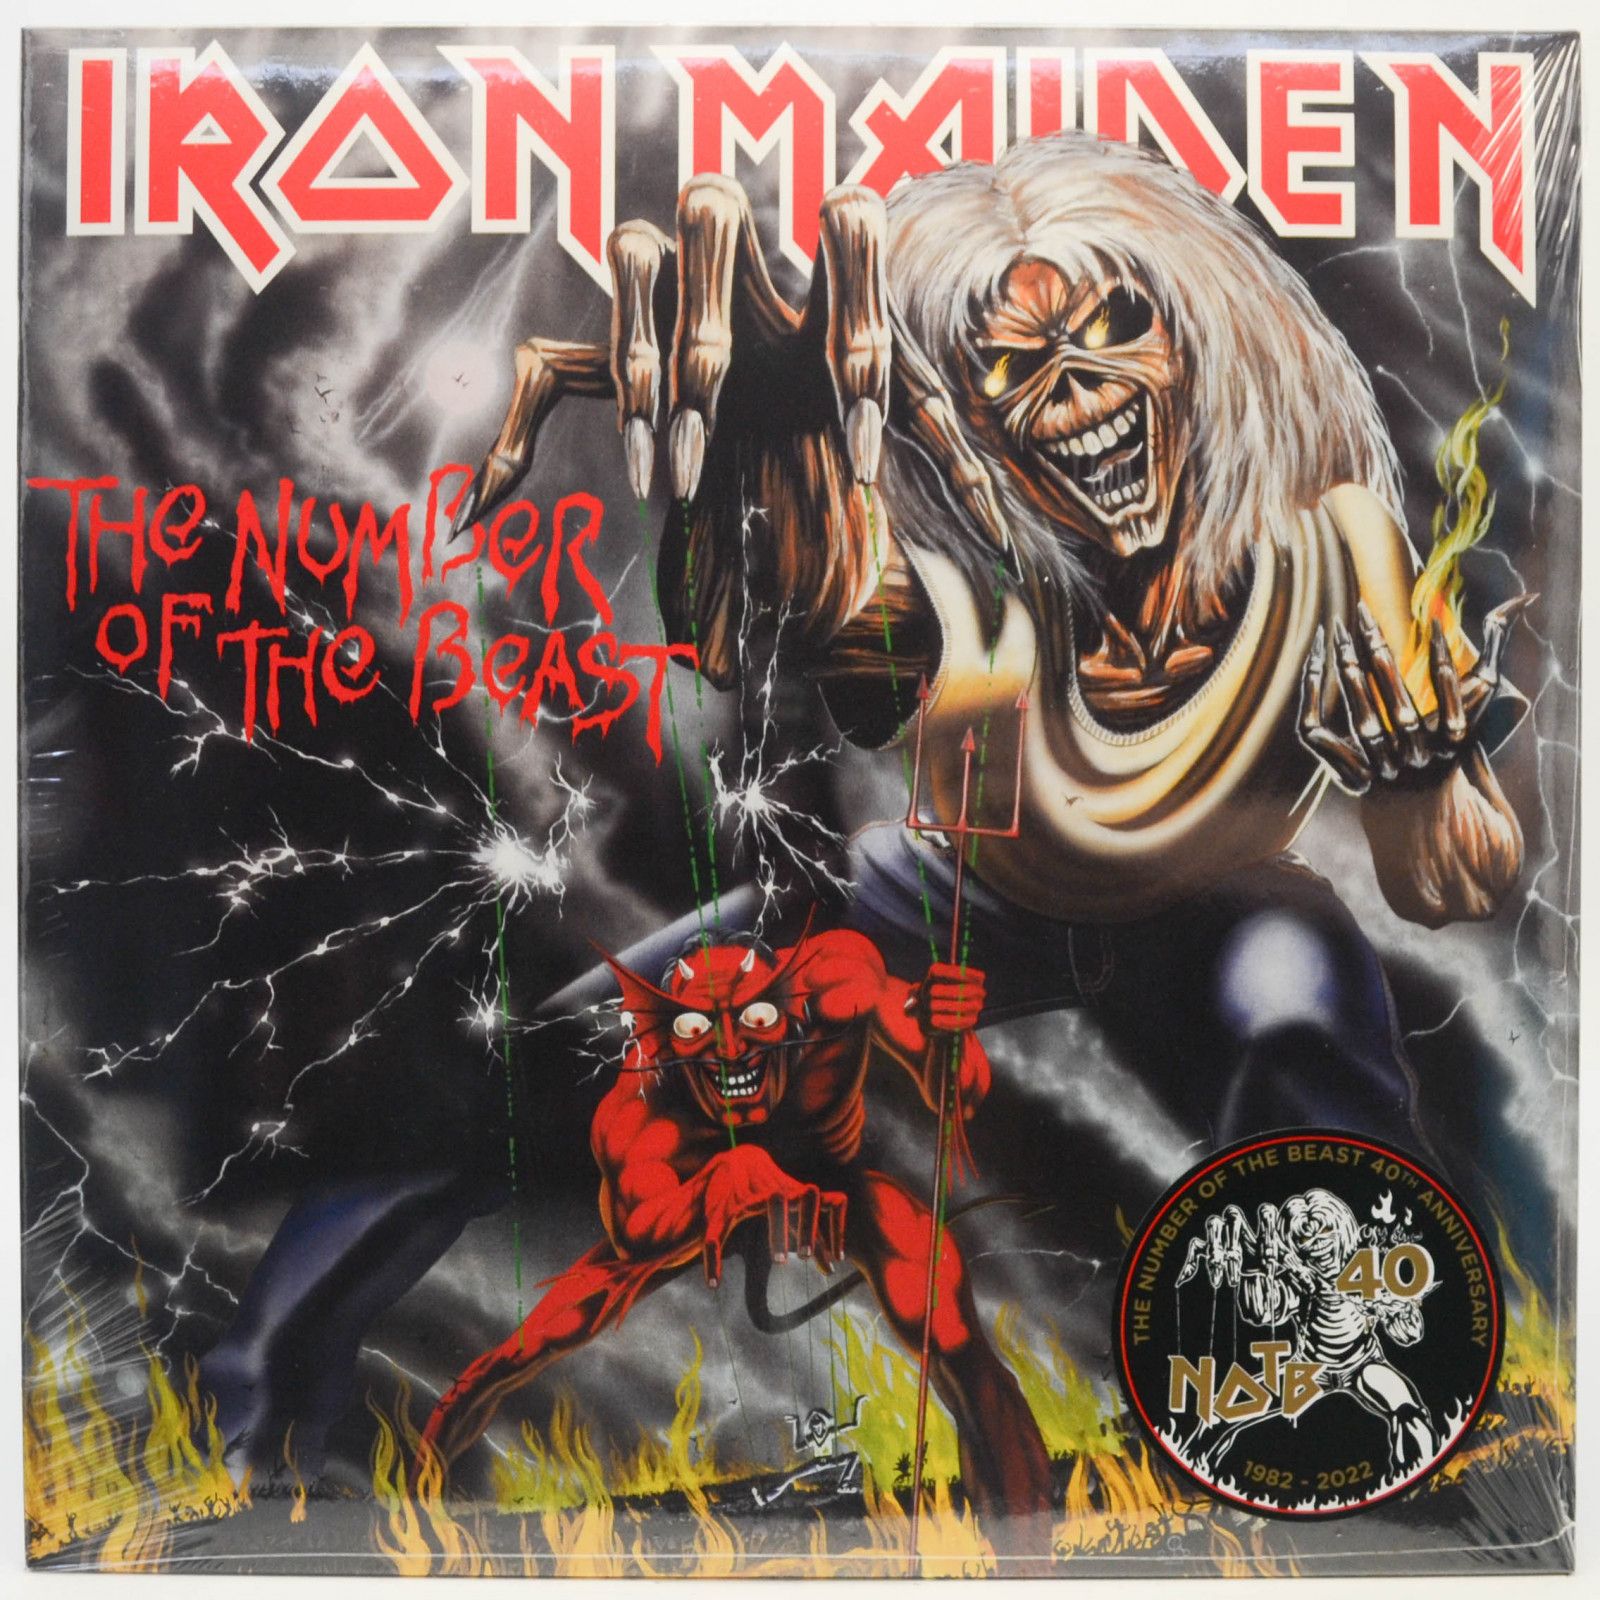 Iron Maiden — The Number Of The Beast, 1982